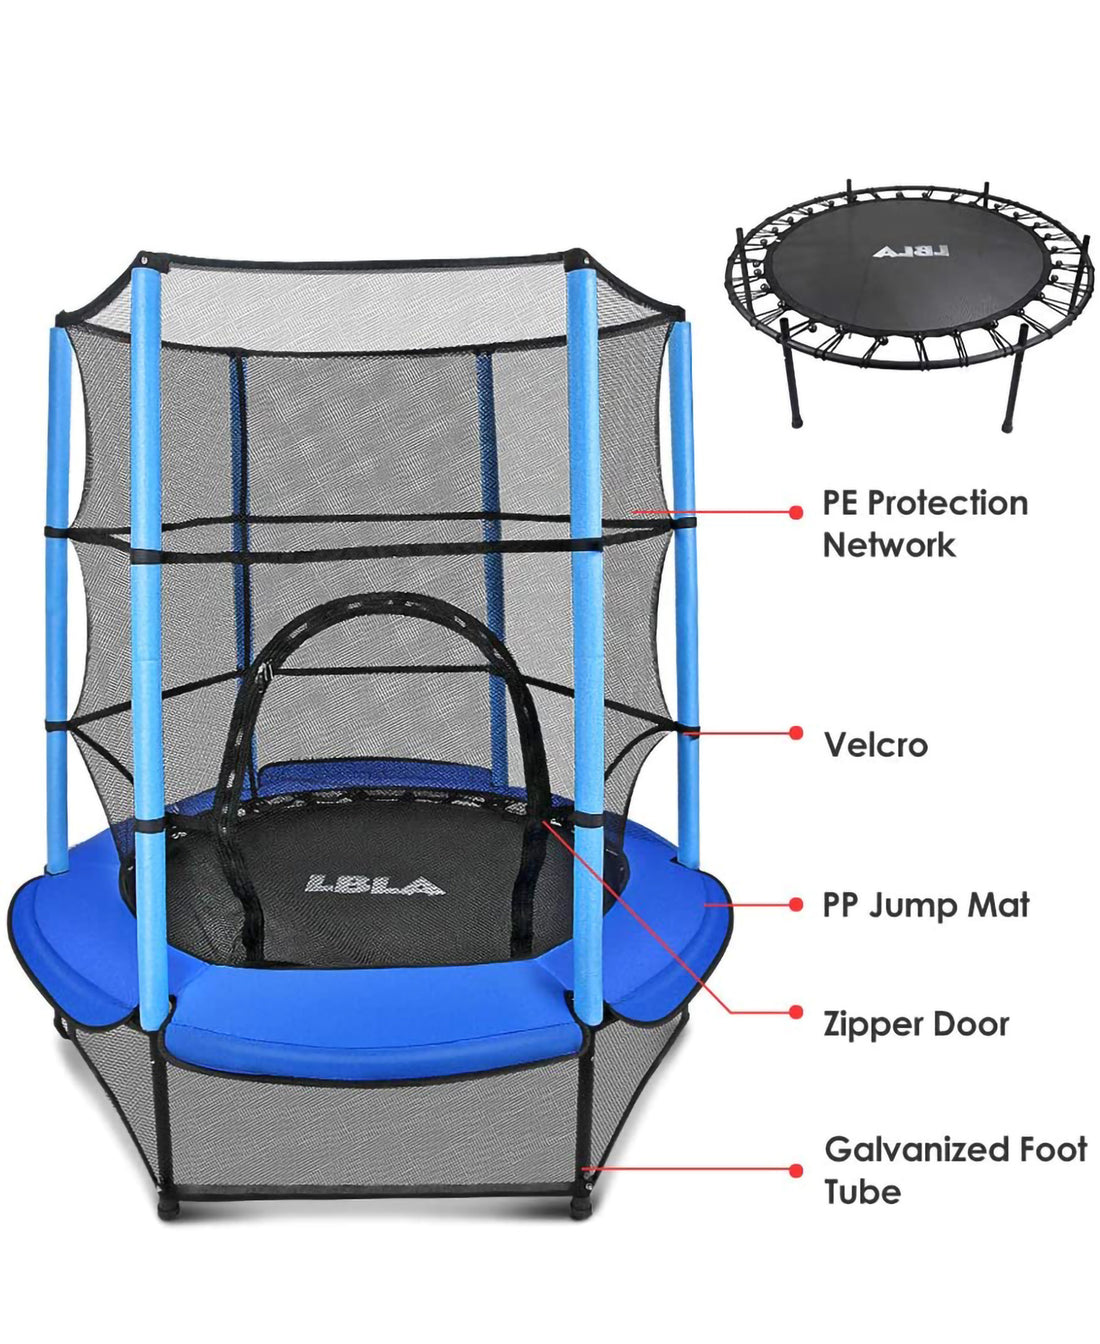 EALING BABY 55-Inch Trampoline with EnclosureNet -Mini Trampoline with Safety Pad and Springs -Toddler Trampoline with Heavy Duty 6 Legs -Trampoline for Kids& Toddlers -Outdoor/indoor Trampoline--Blue